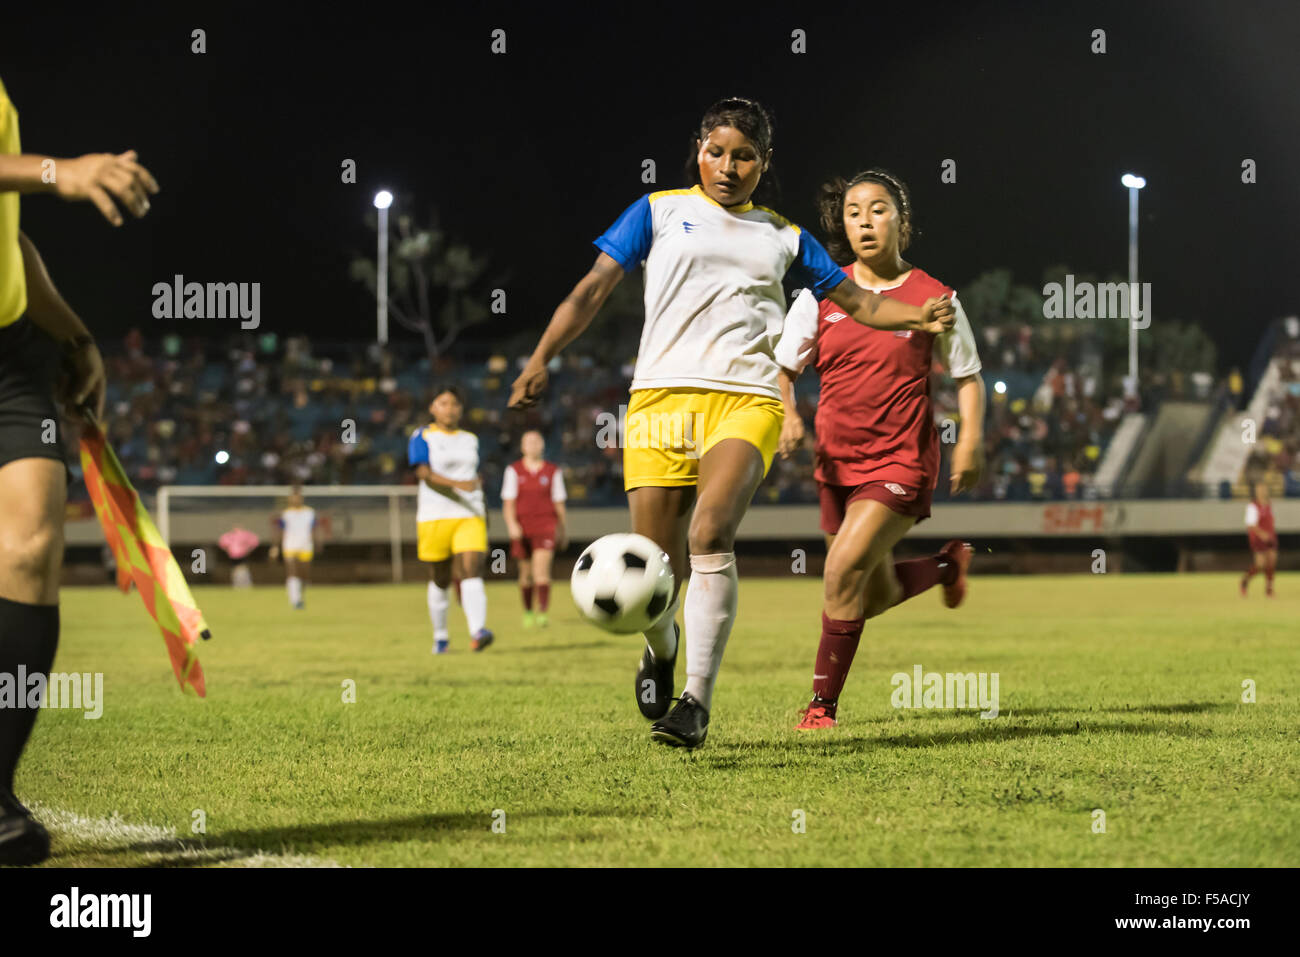 Palmas, Brazil. 30th October, 2015. a Xerente player hold off her opponent from the USA during the final of the women's football, between the local Xerente tribe and the Native American team from the USA at the International Indigenous Games in the city of Palmas, Tocantins State, Brazil. The USA won on a penalty shoot-out after a 0-0 match. Credit:  Sue Cunningham Photographic/Alamy Live News Stock Photo